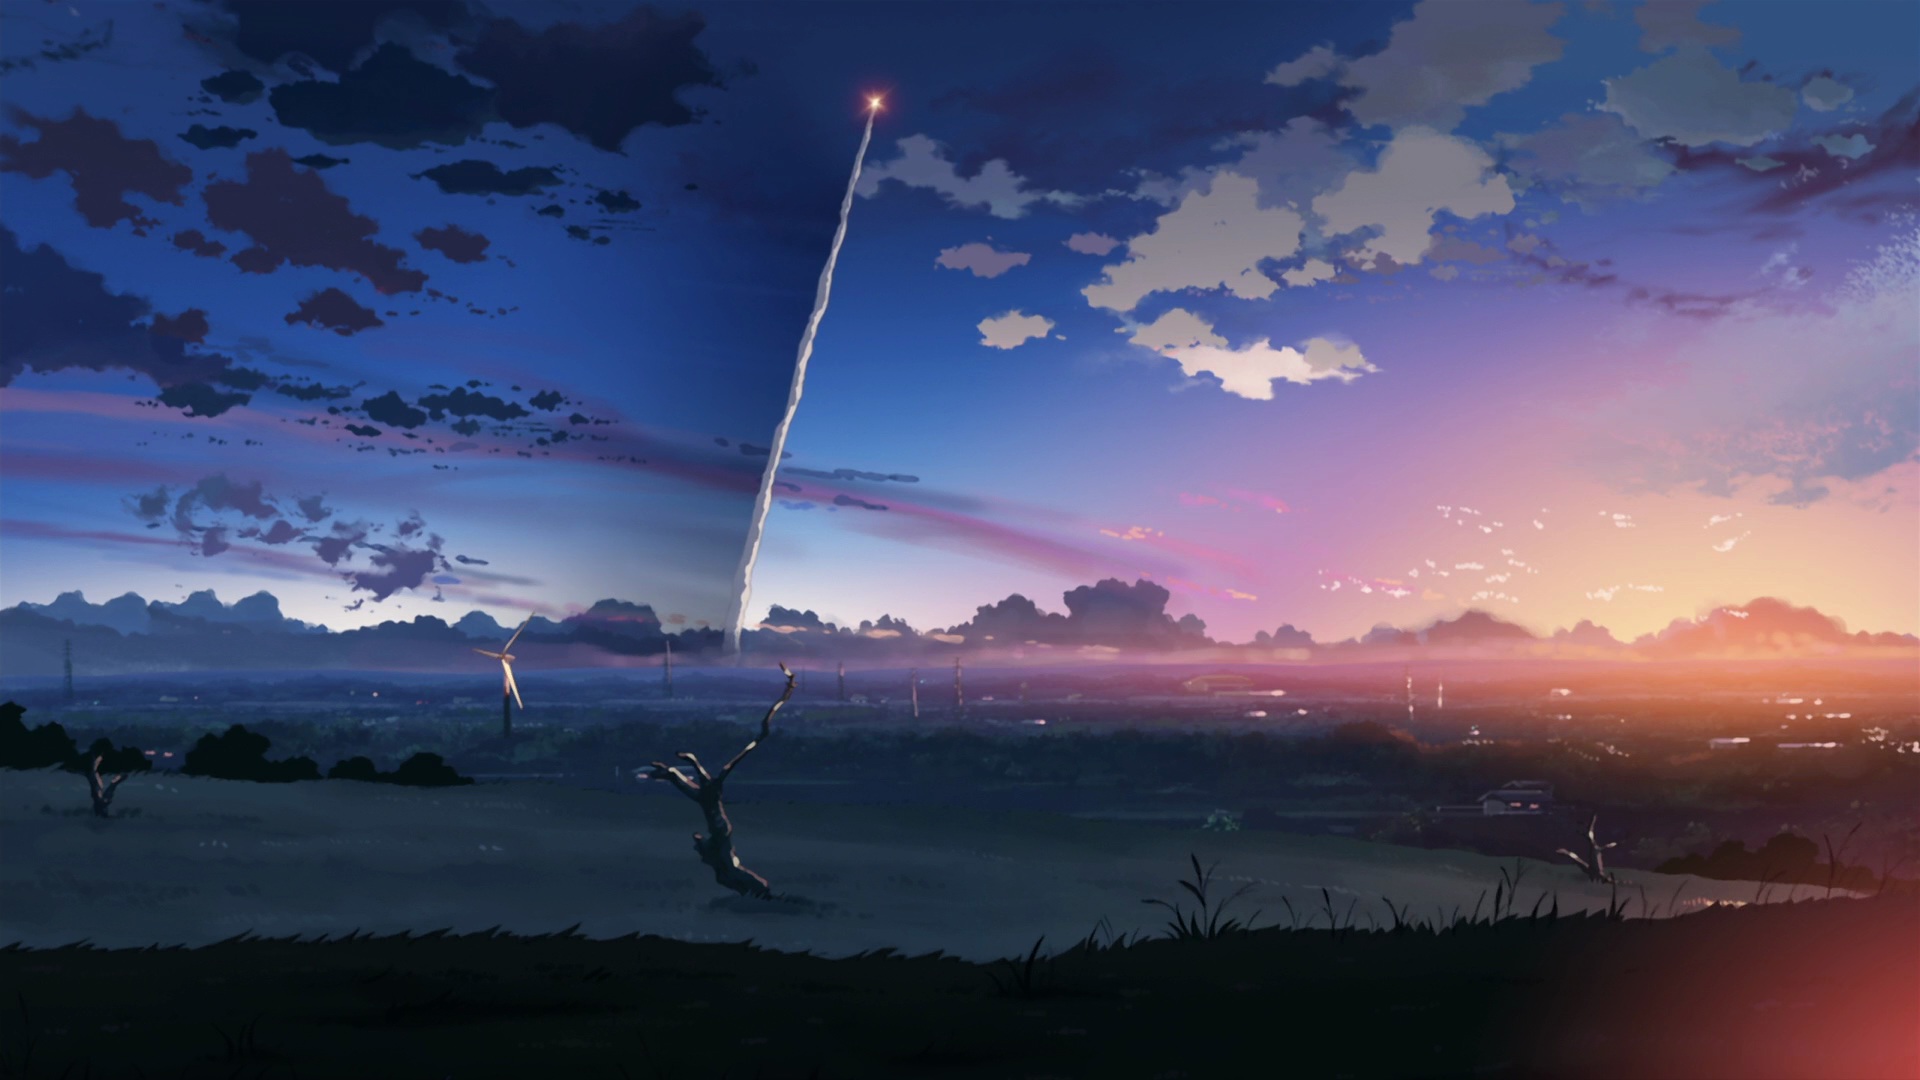 Launched Missile In Sky Art Wallpapers